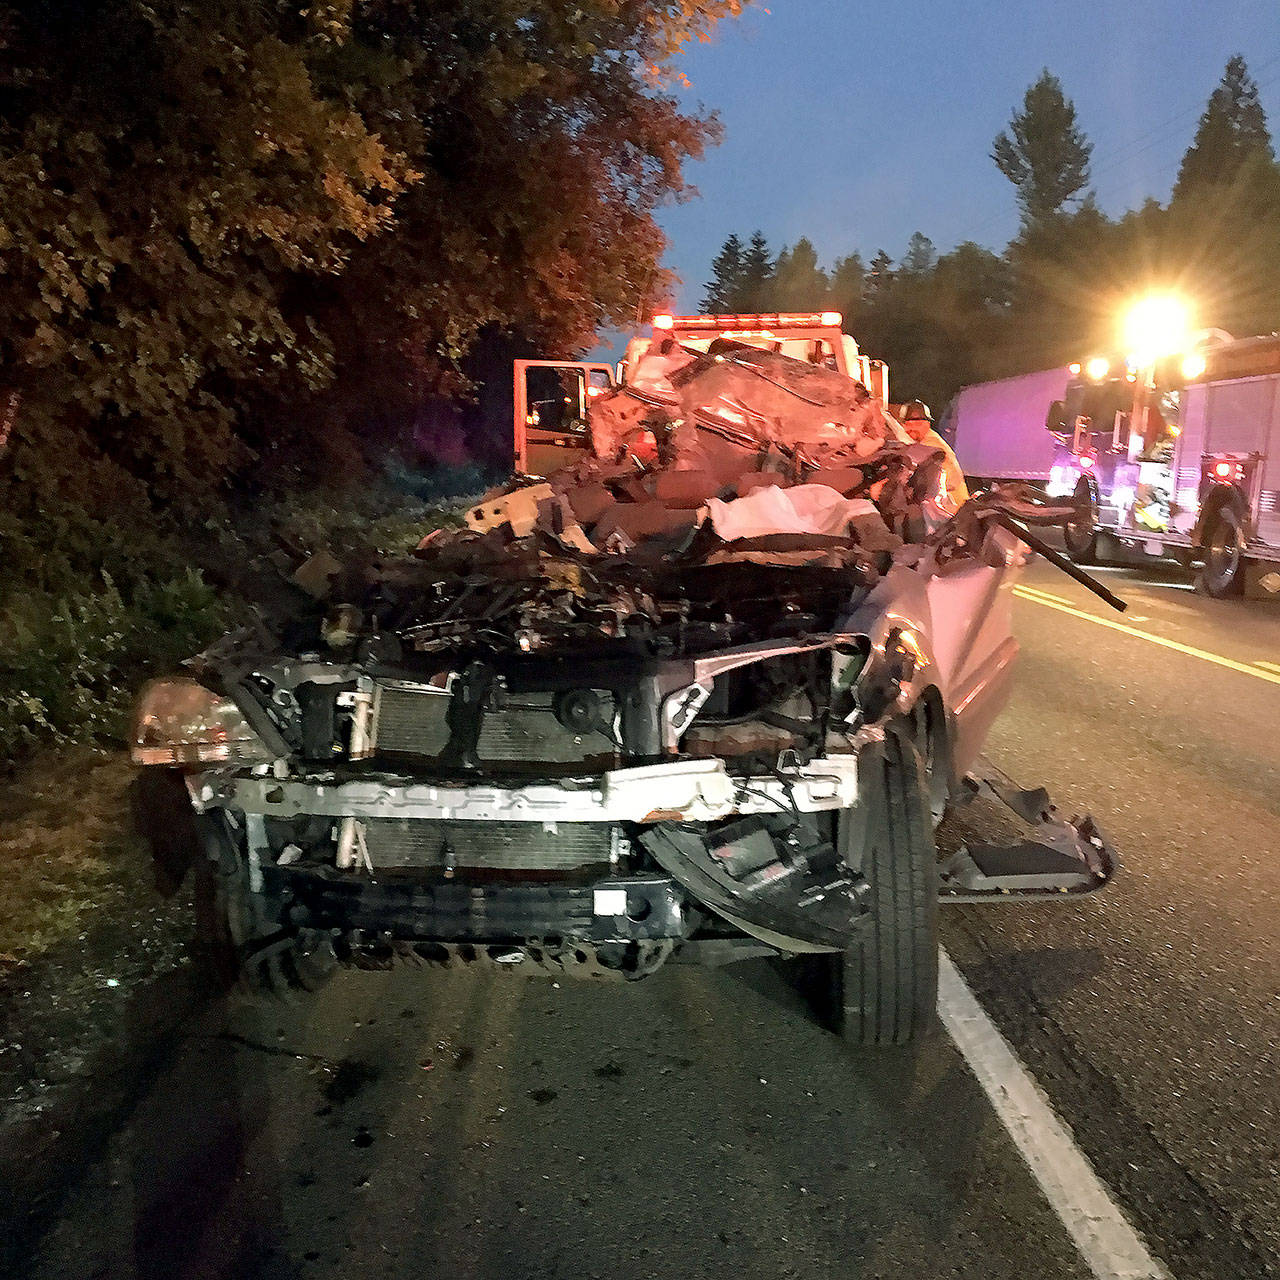 The wreckage of a vehicle in which three teenagers died in July on Alderwood Mall Parkway. (Snohomish County Sheriff’s Office)